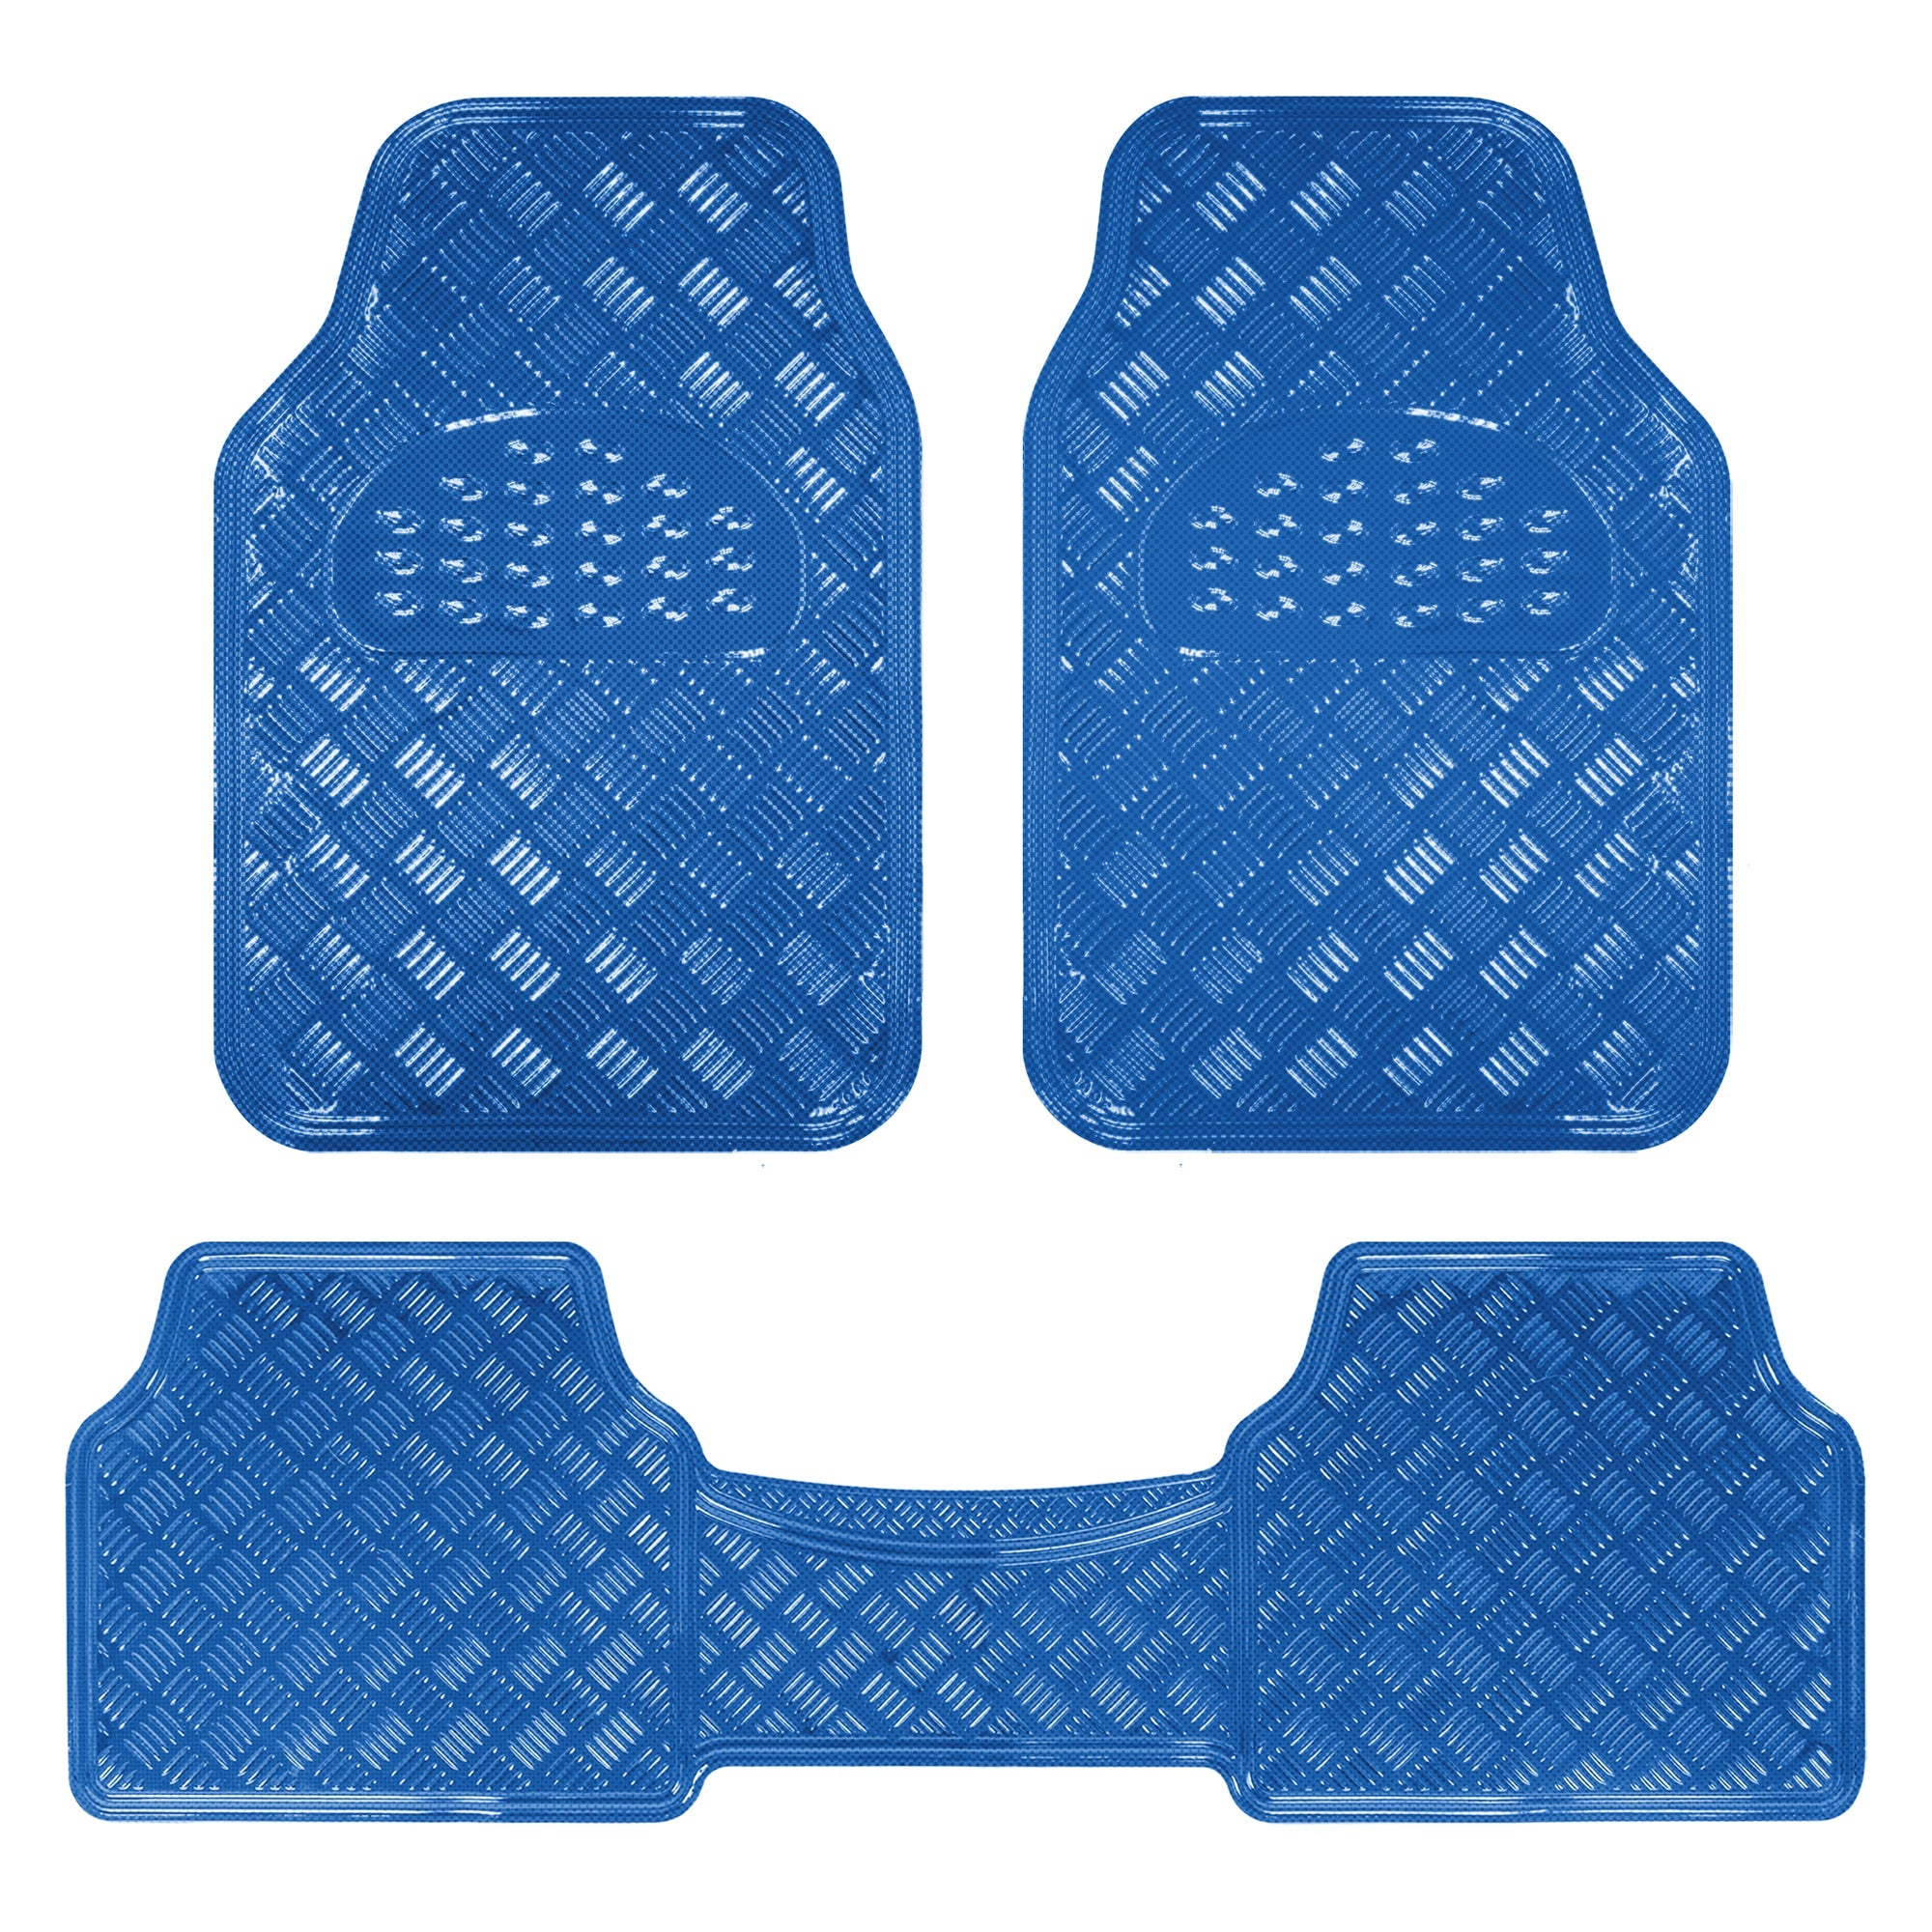 BDK MT-643-BL Metallic Bling Design Car Floor Mats - 3-Piece Set of Heavy Duty All Weather with Rubber Backing Fits Car Truck Van SUV (Blue) - Blue:#0000FF